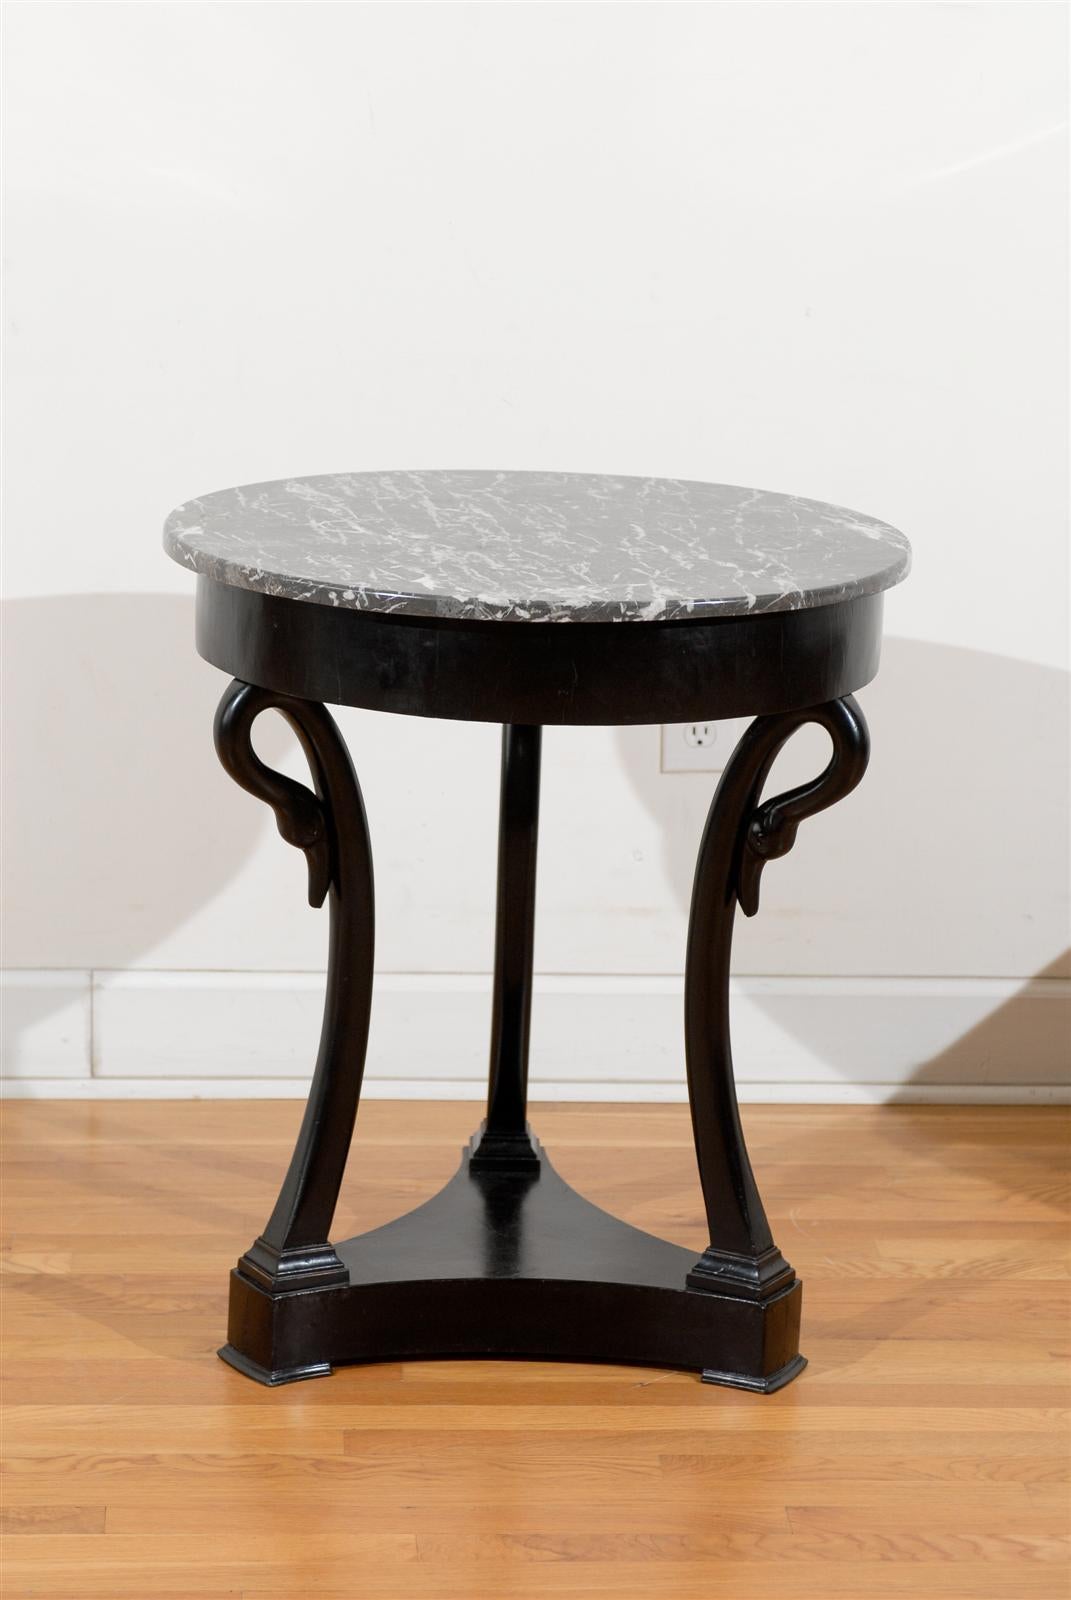 A French ebonized wood Directoire style guéridon side table with grey marble top and swan motifs from the late 19th century. This French table features a round variegated grey marble top sitting above a simple apron. The table is supported by three